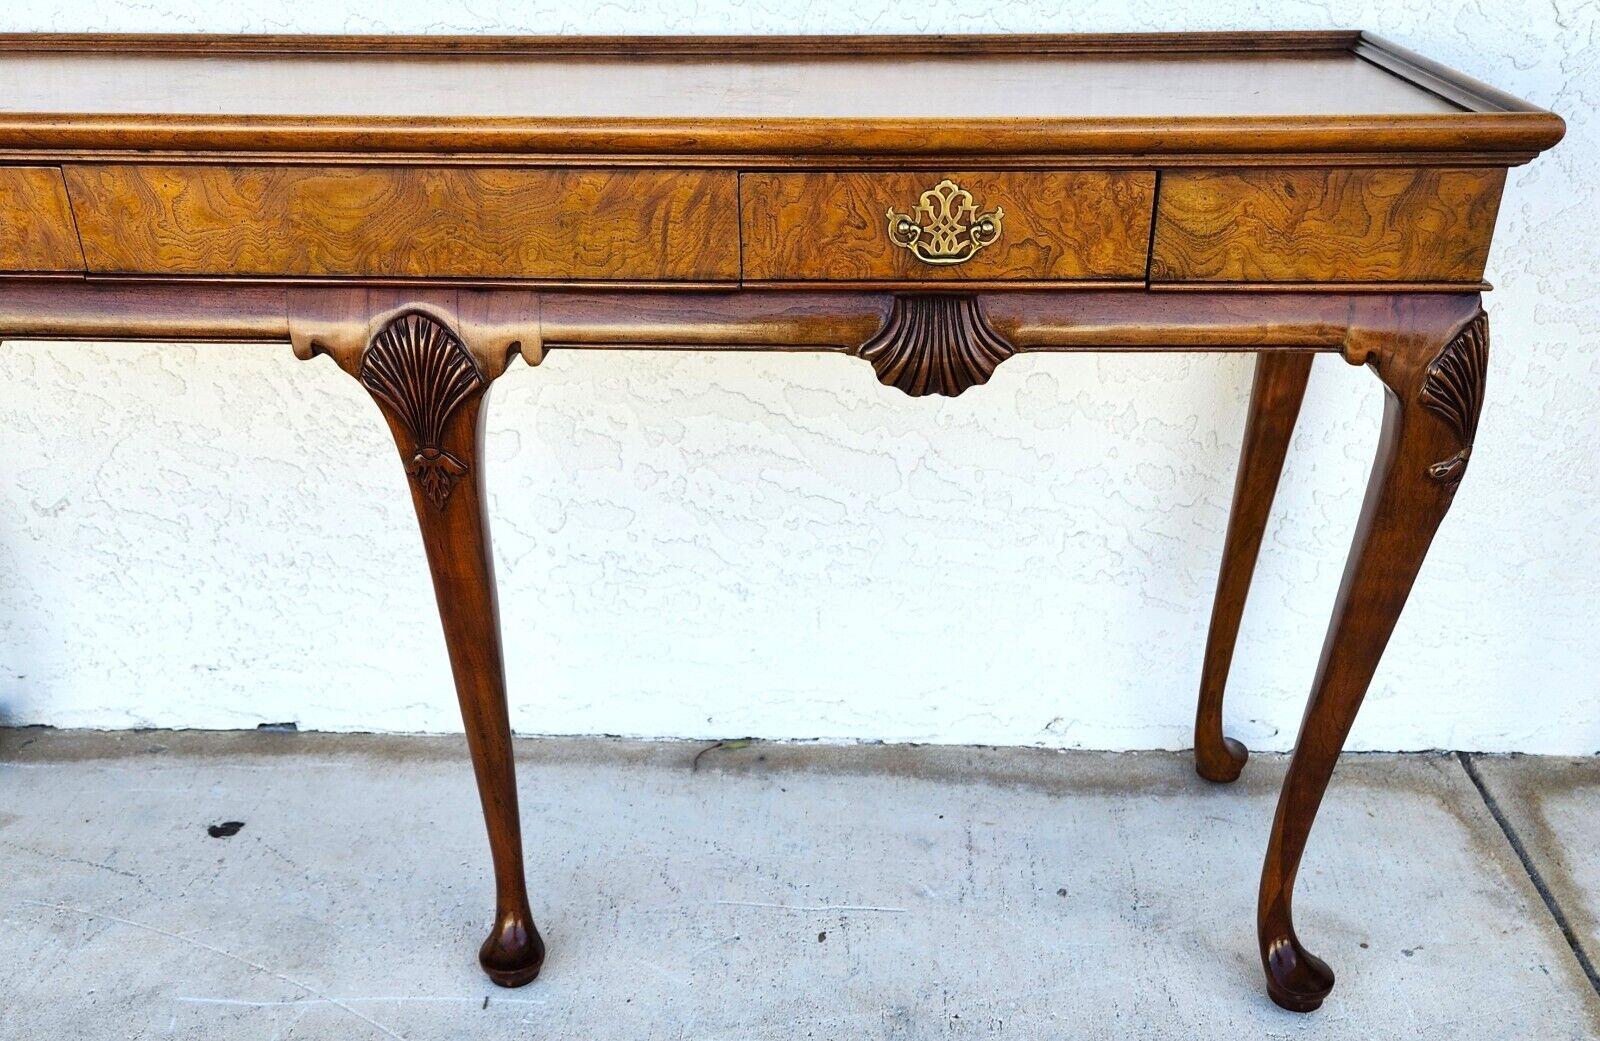 For FULL item description click on CONTINUE READING at the bottom of this page.

Offering One Of Our Recent Palm Beach Estate Fine Furniture Acquisitions Of A
Gorgeous Queen Anne style console or sofa table by Baker Furniture
USA, Circa 1980s
Carved